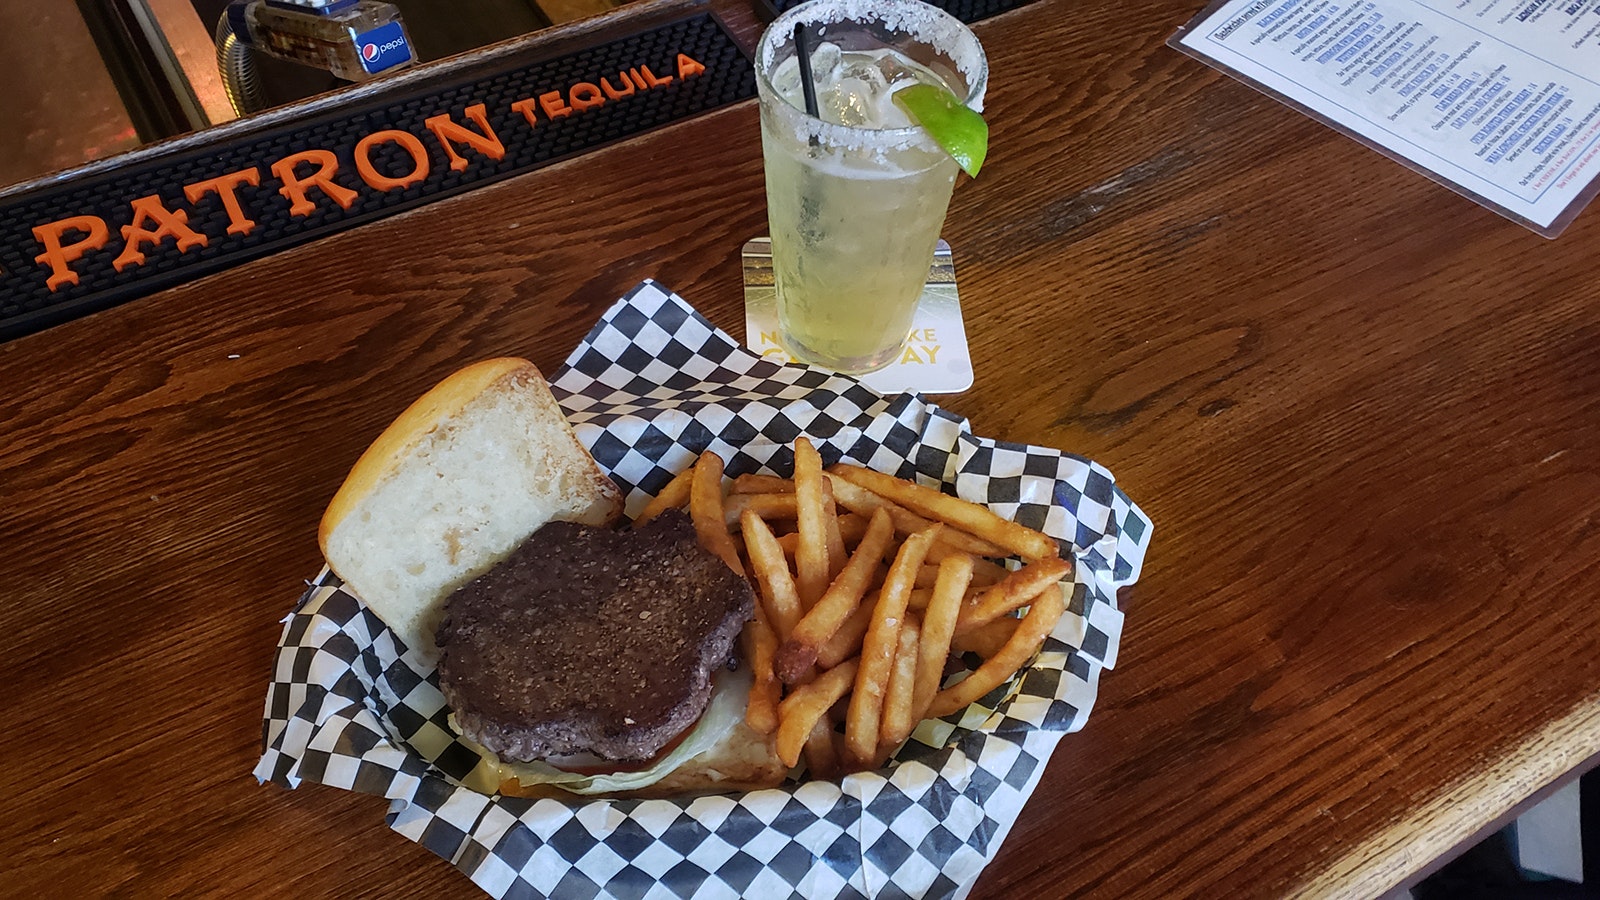 The bison burger is a customer favorite with fries, along with the house specialty — a salt-rimmed margarita.